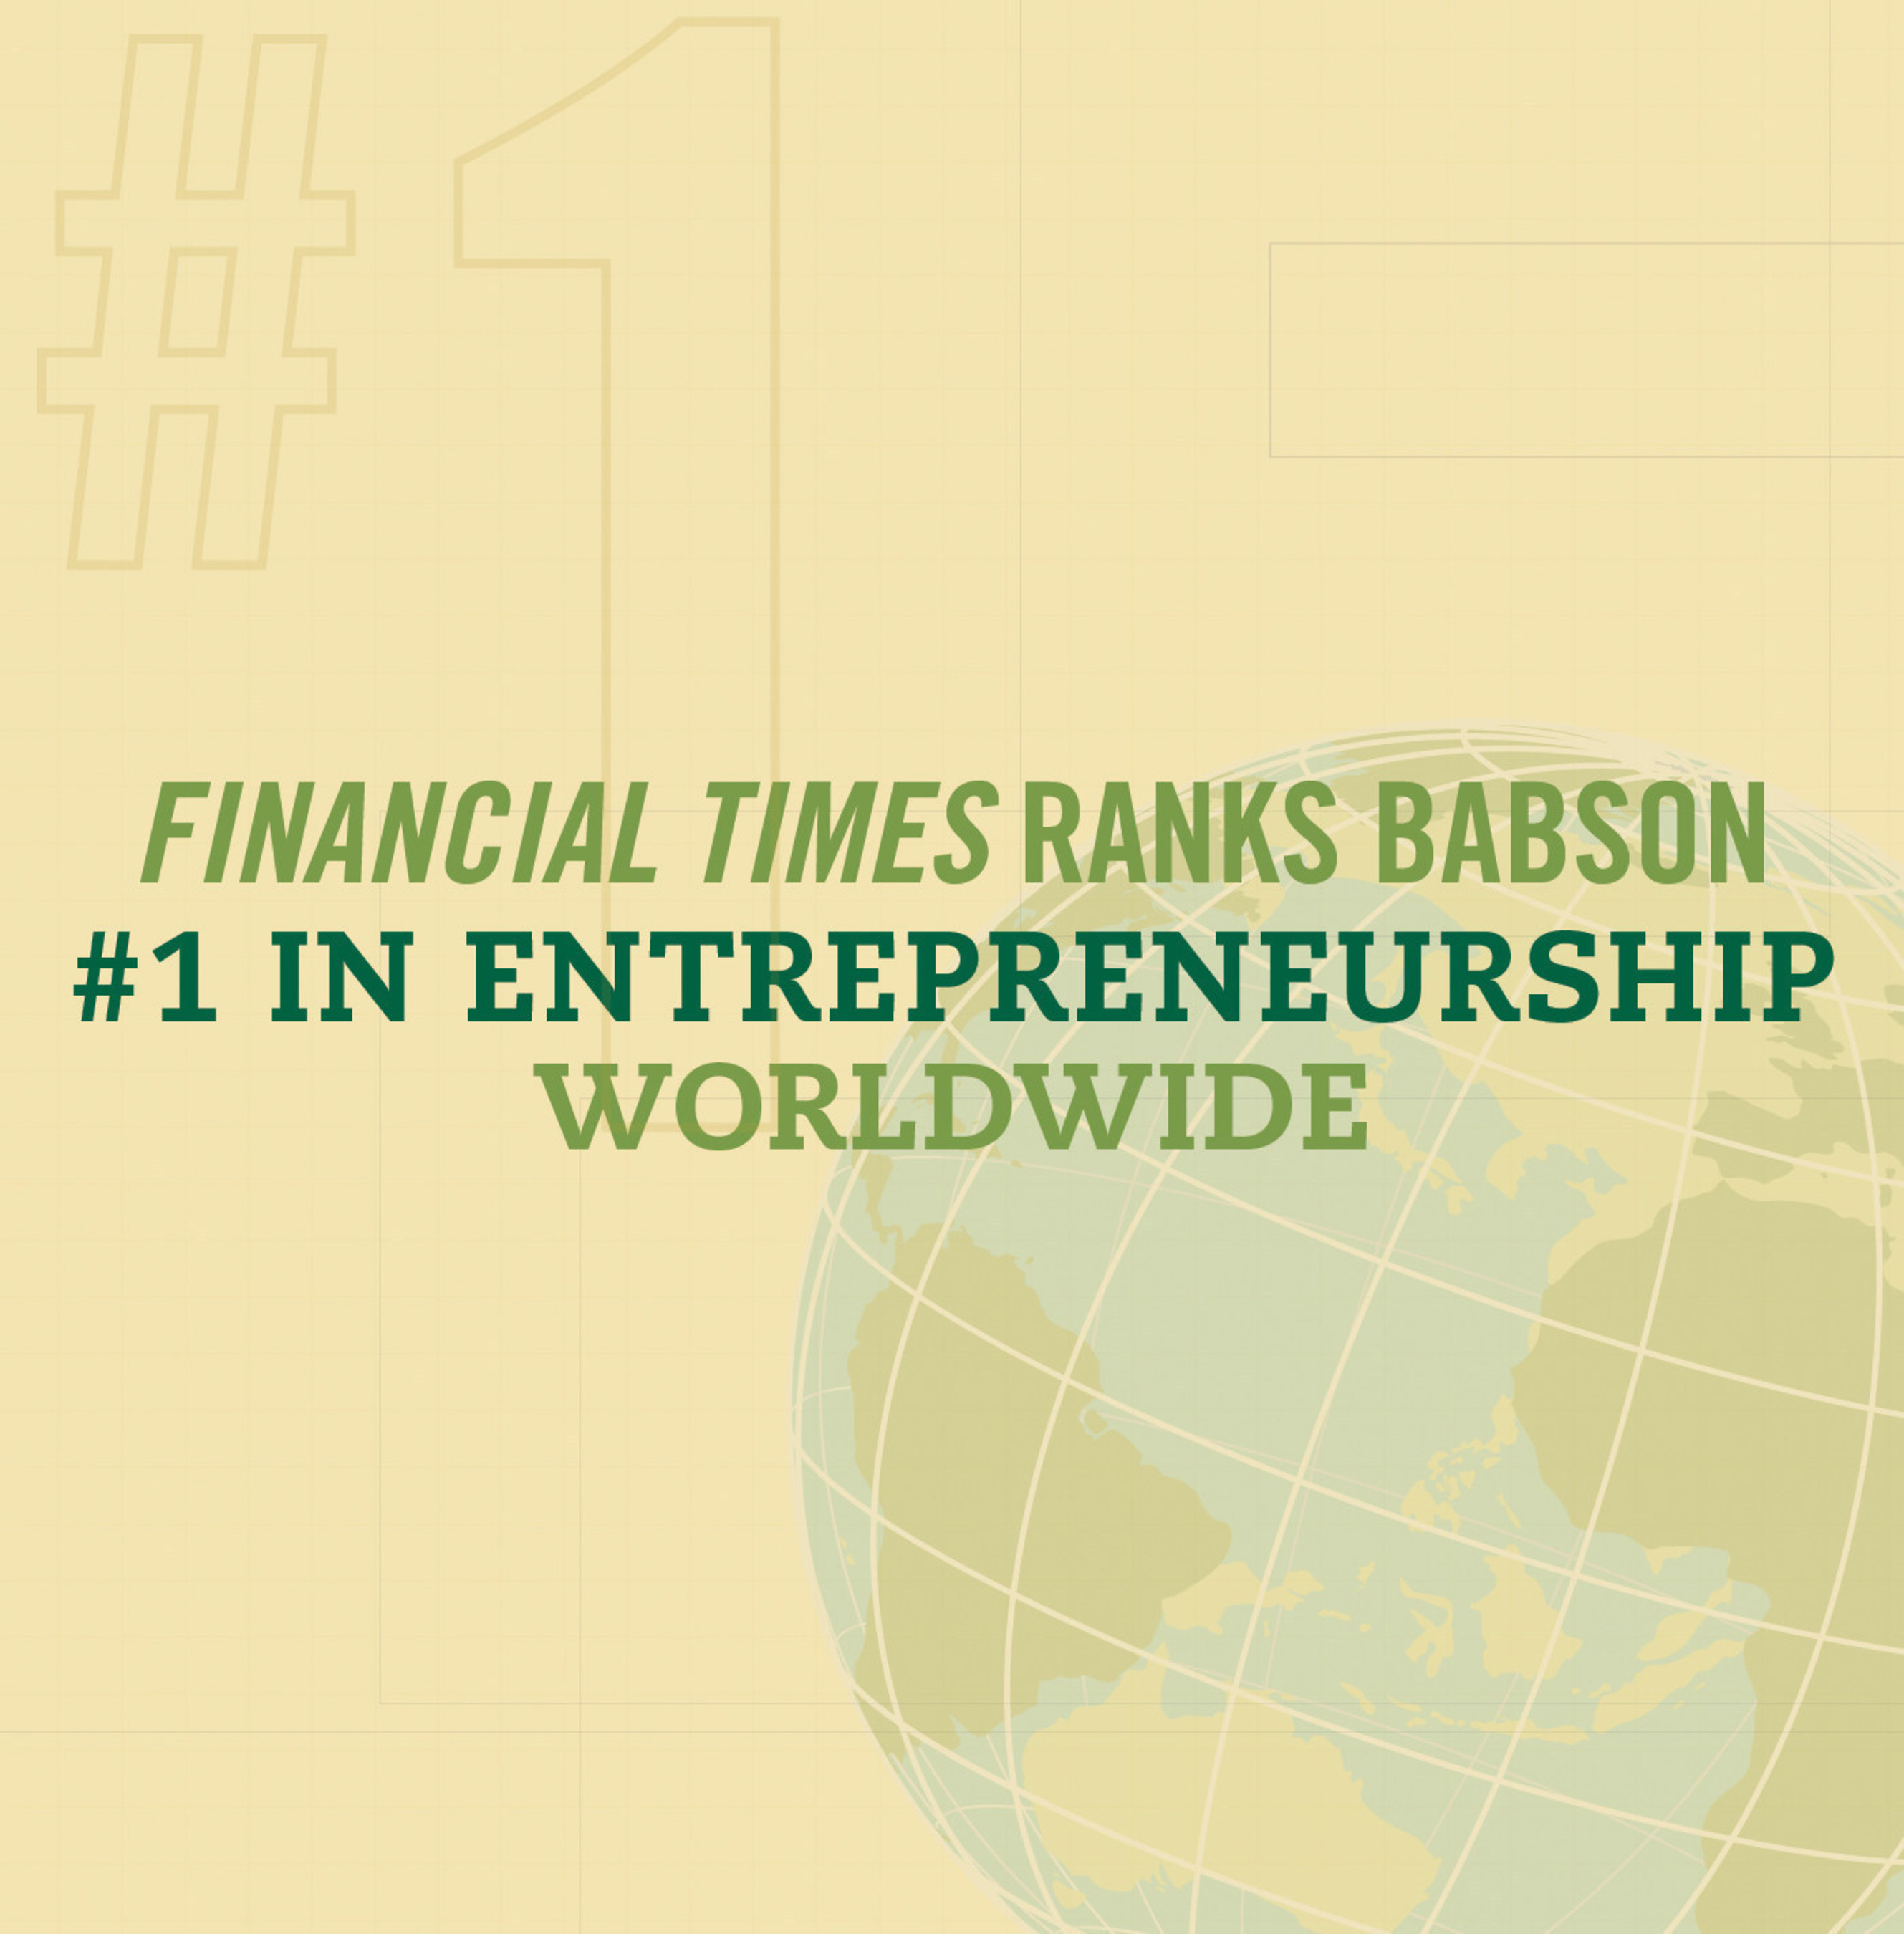 The Financial Times Ranks Babson College #1 in Entrepreneurship Worldwide